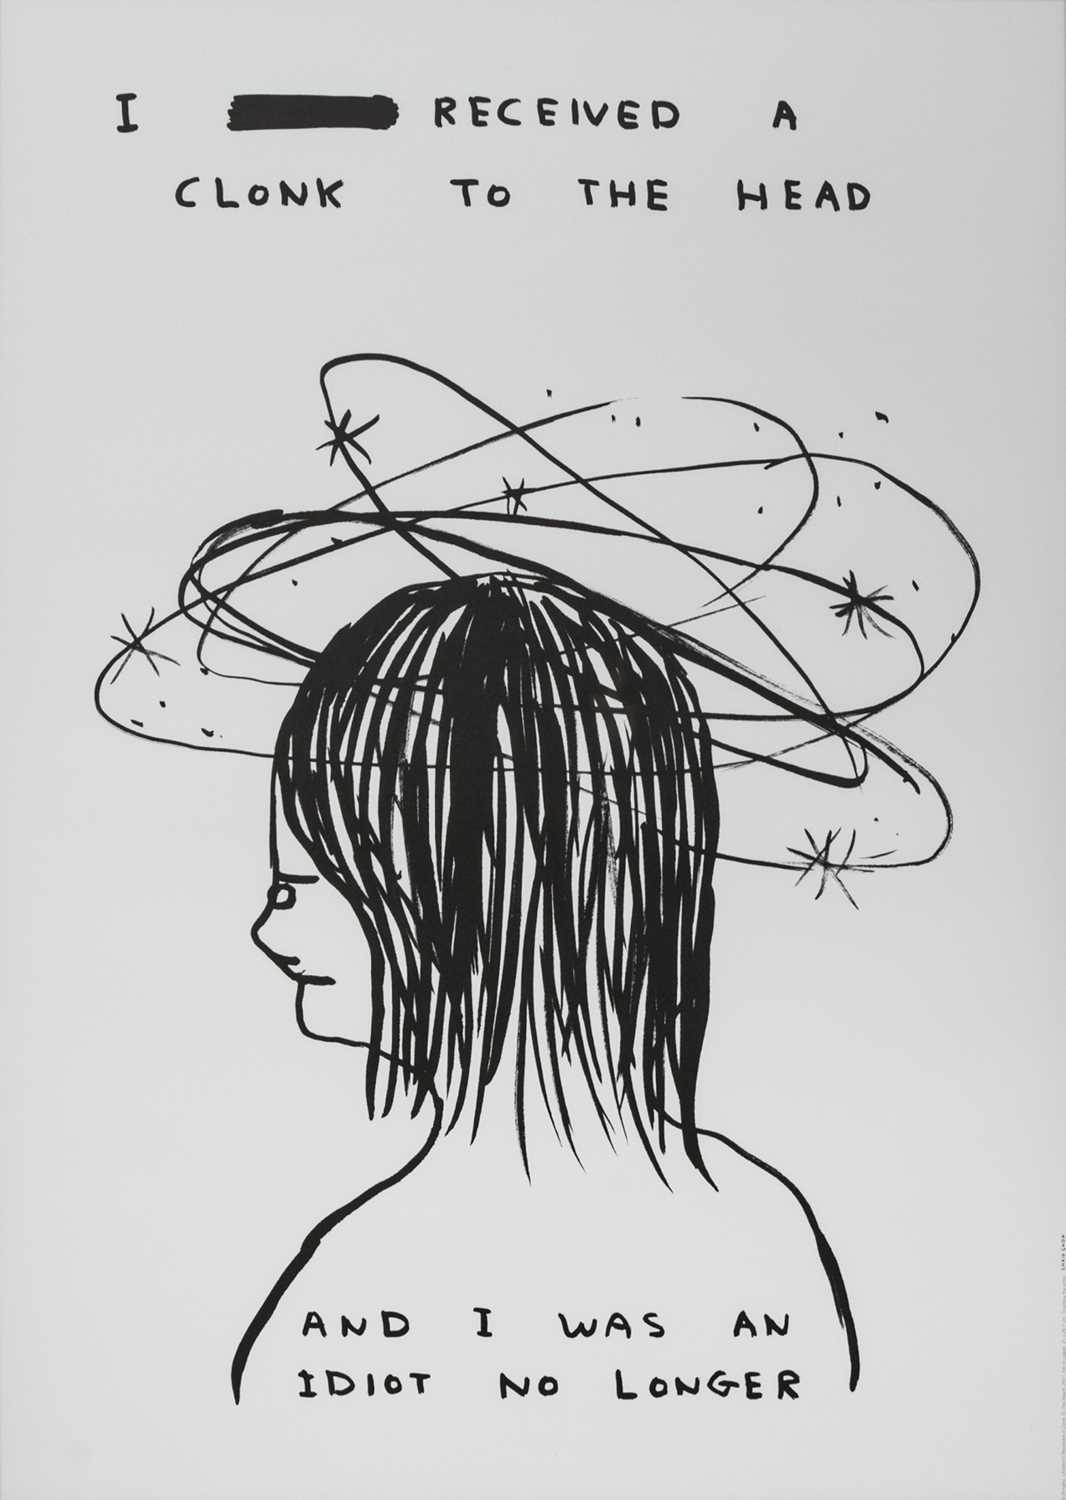 Lot 79 - I'VE RECIEVED A CLONK TO THE HEAD, A LITHOGRAPH BY DAVID SHRIGLEY